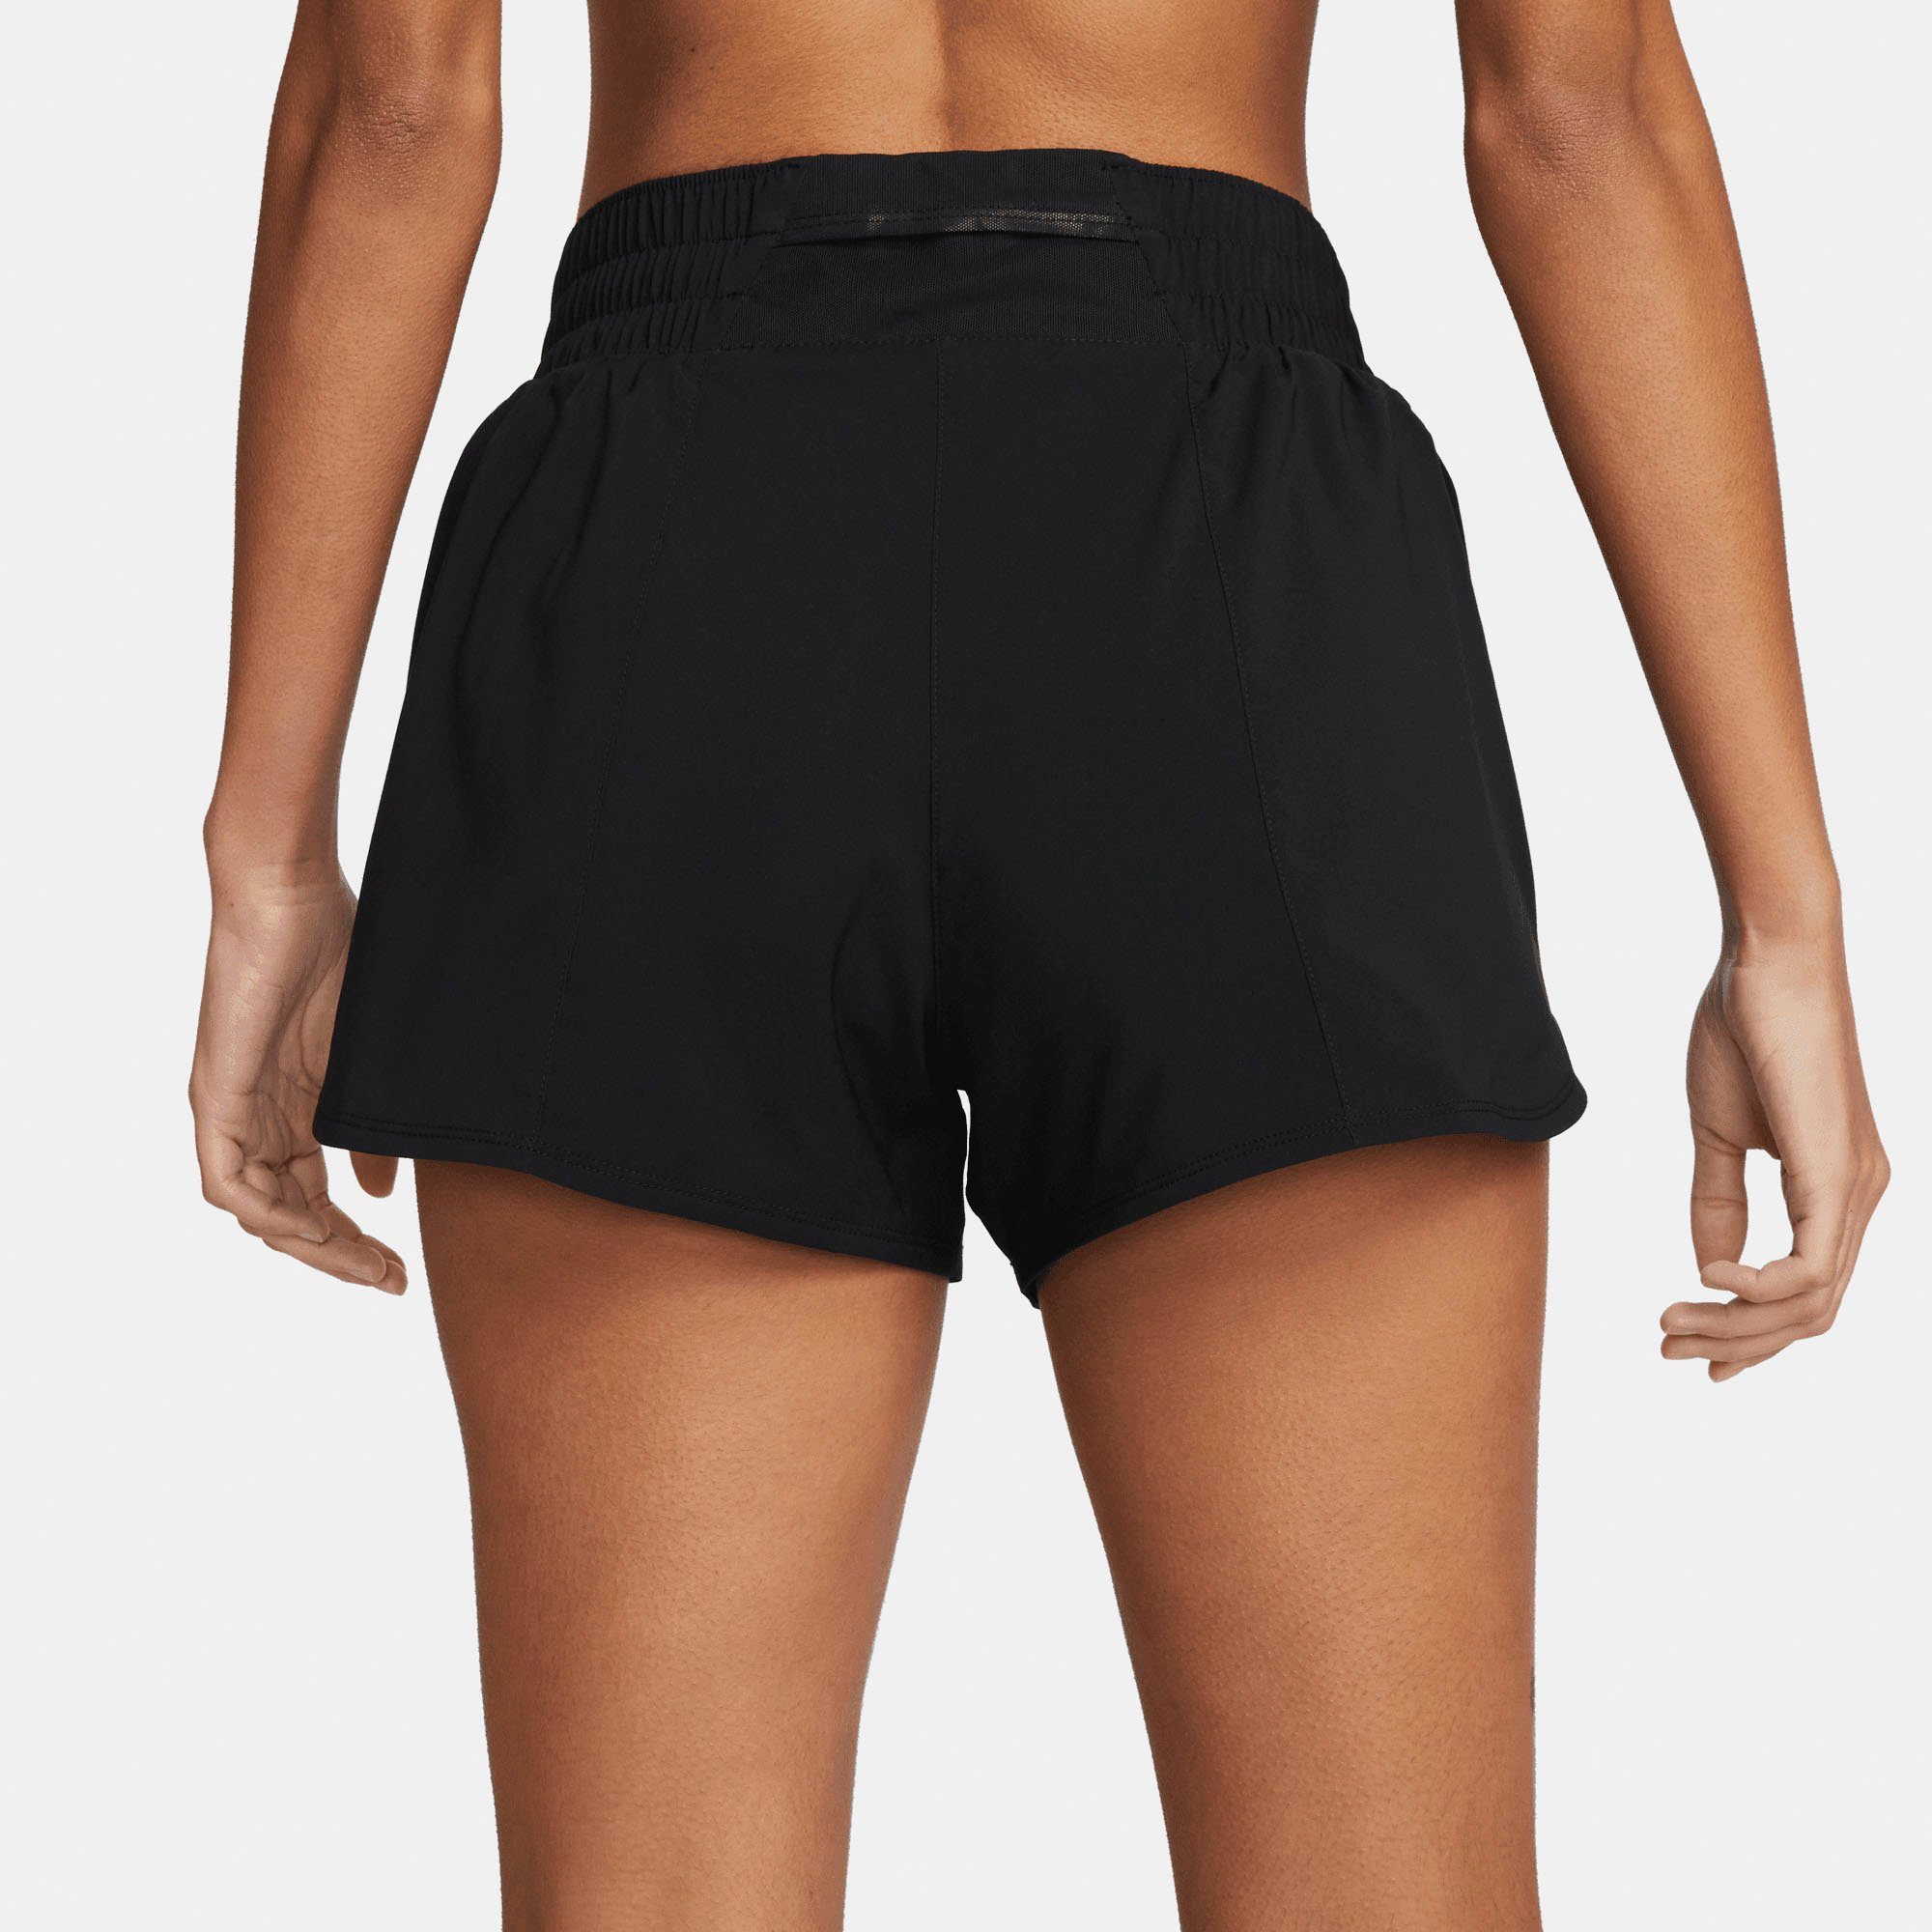 Nike Trainingsshorts DRI-FIT SHORTS WOMEN'S BRIEF-LINED BLACK/REFLECTIVE MID-RISE SILV ONE